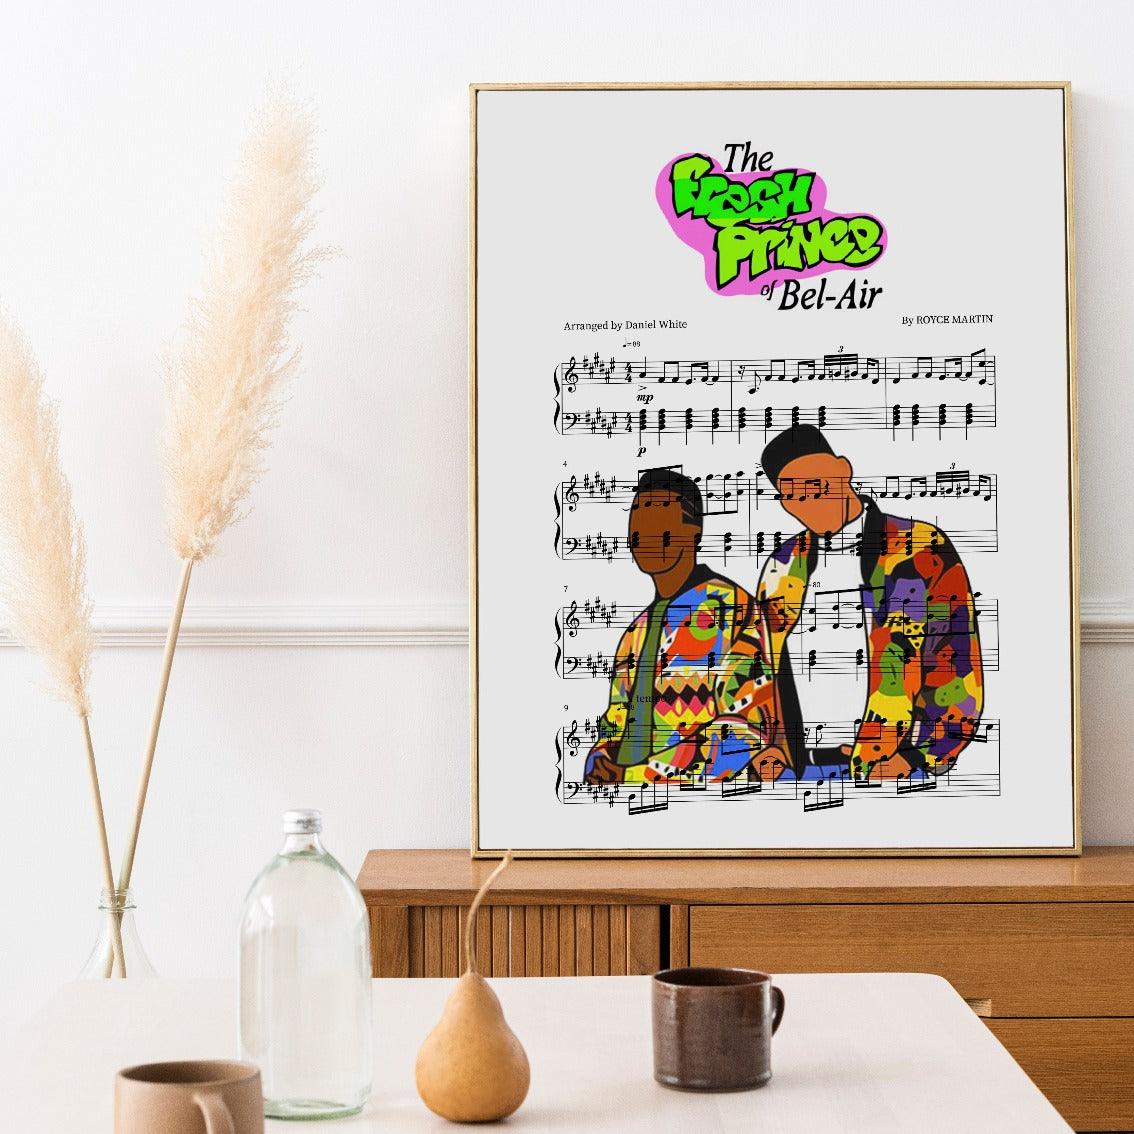 While The Fresh Prince of Bel-Air began airing in 1990, the extended version of the theme song was officially released as a single in Europe in 1992 with the title “Yo Home to Bel-Air.” The single earned a Silver certification in the United Kingdom to represent 200,000 units sold and also reached the Top 5 on the pop charts in Spain and the Netherlands.